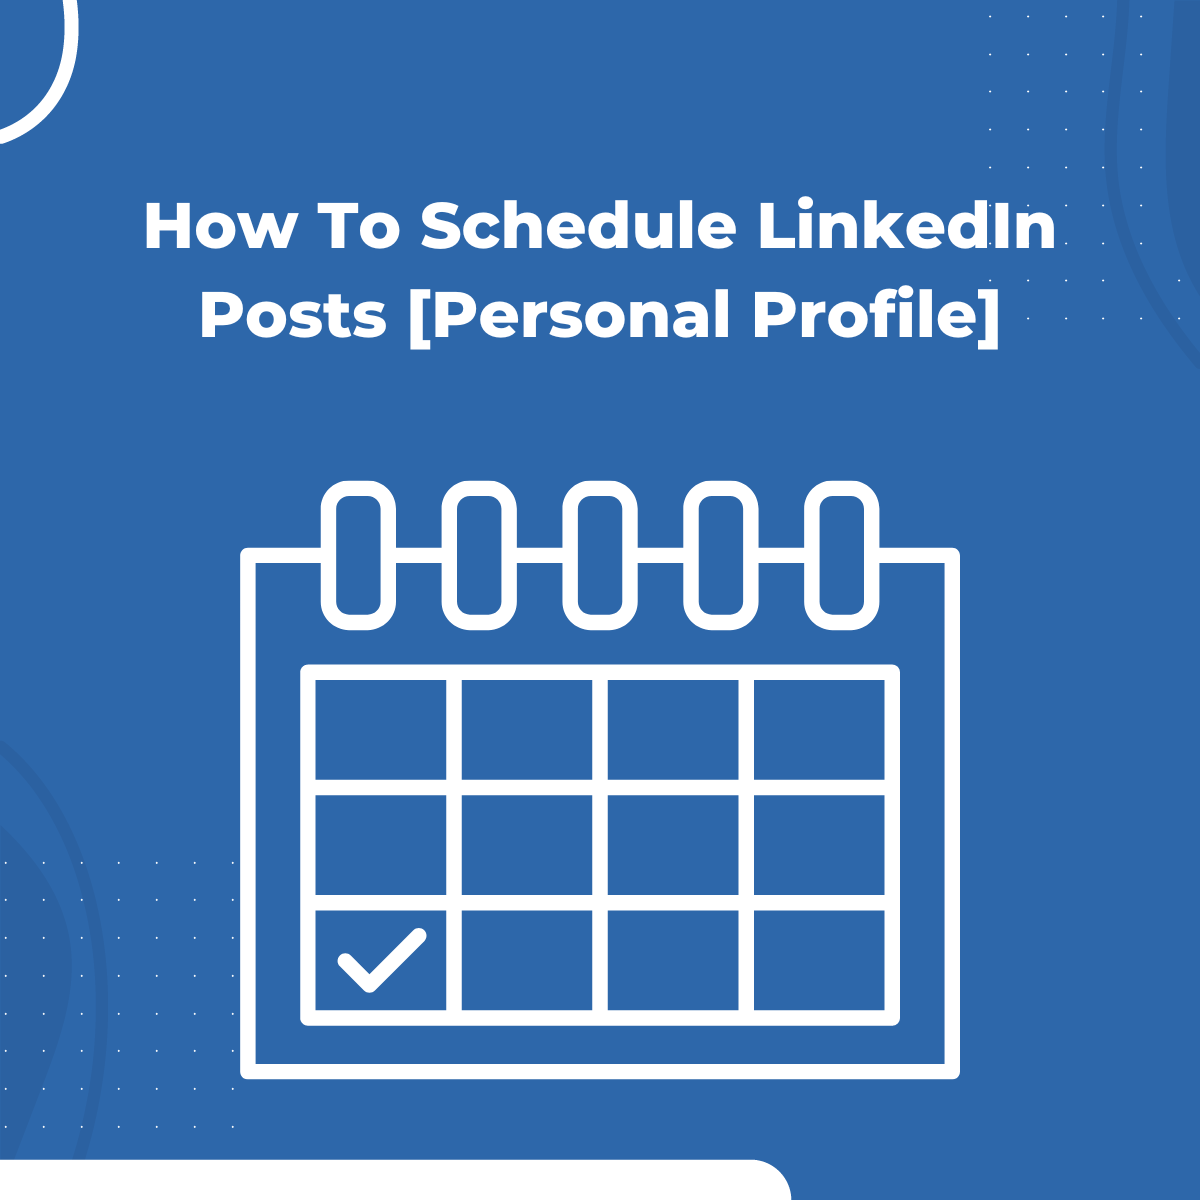 How To Schedule LinkedIn Posts [Personal Profile]